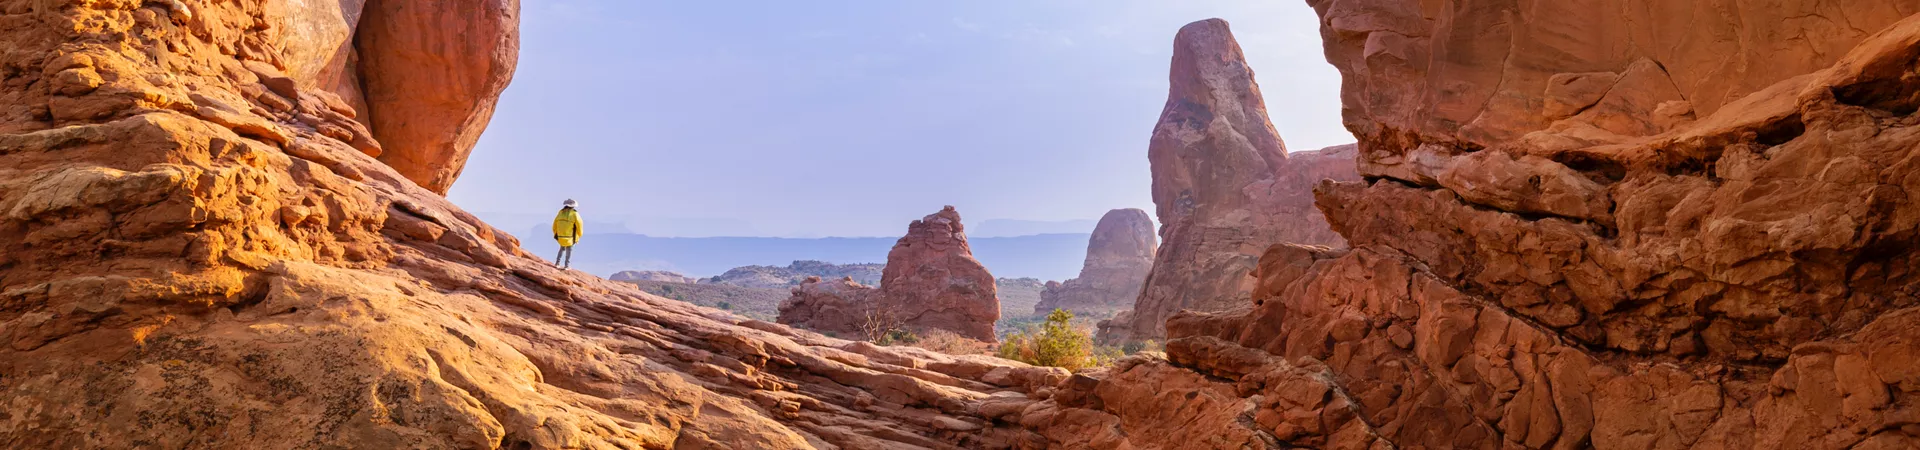 Tourist hiking in Arches National Park, USA